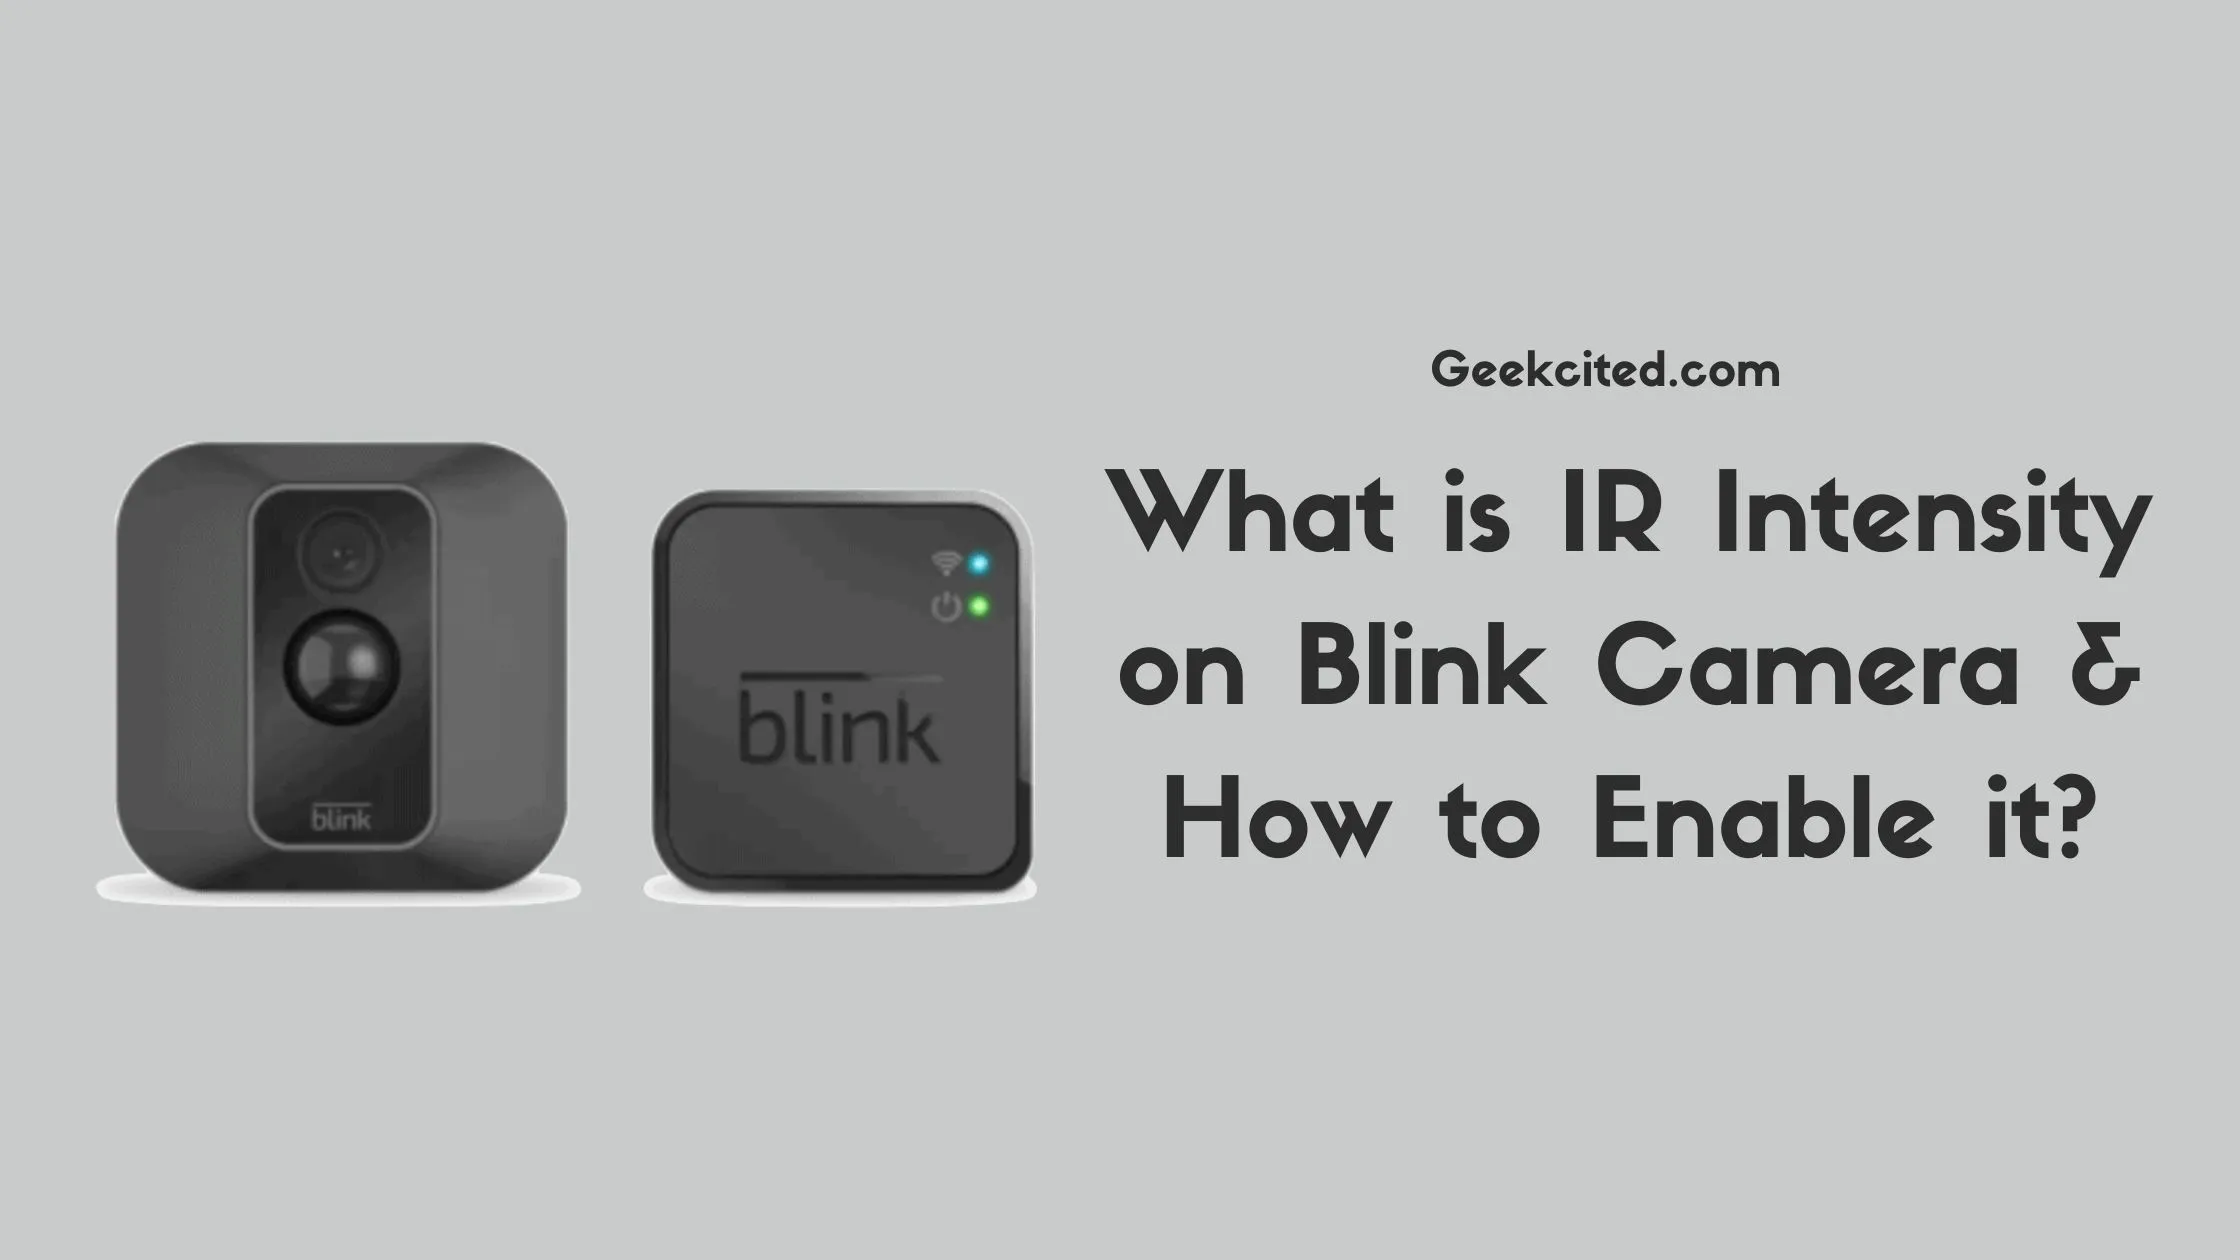 What is IR Intensity on Blink Camera & How to Enable it